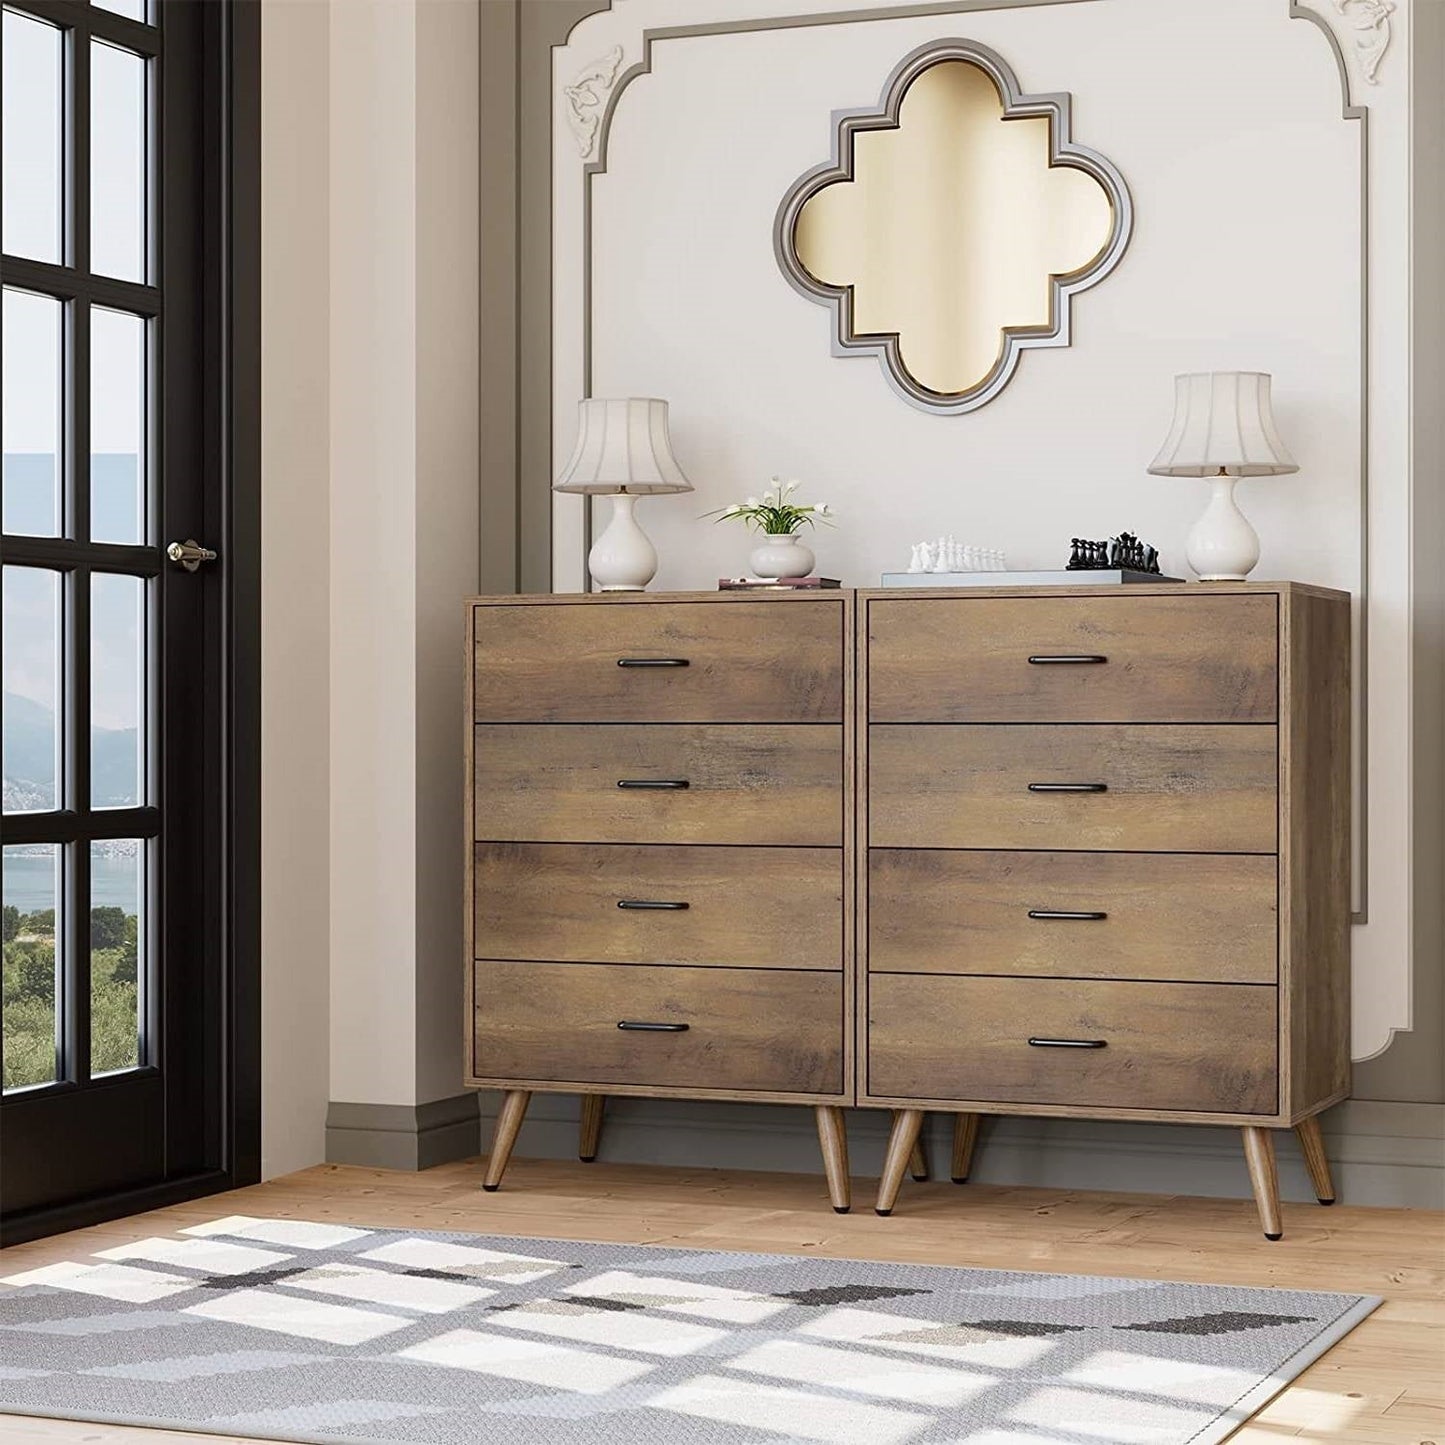 Bedroom > Nightstand And Dressers - Modern Scandinavian Mid-Century 4-Drawer Chest Cabinet In Brown Wood Finish